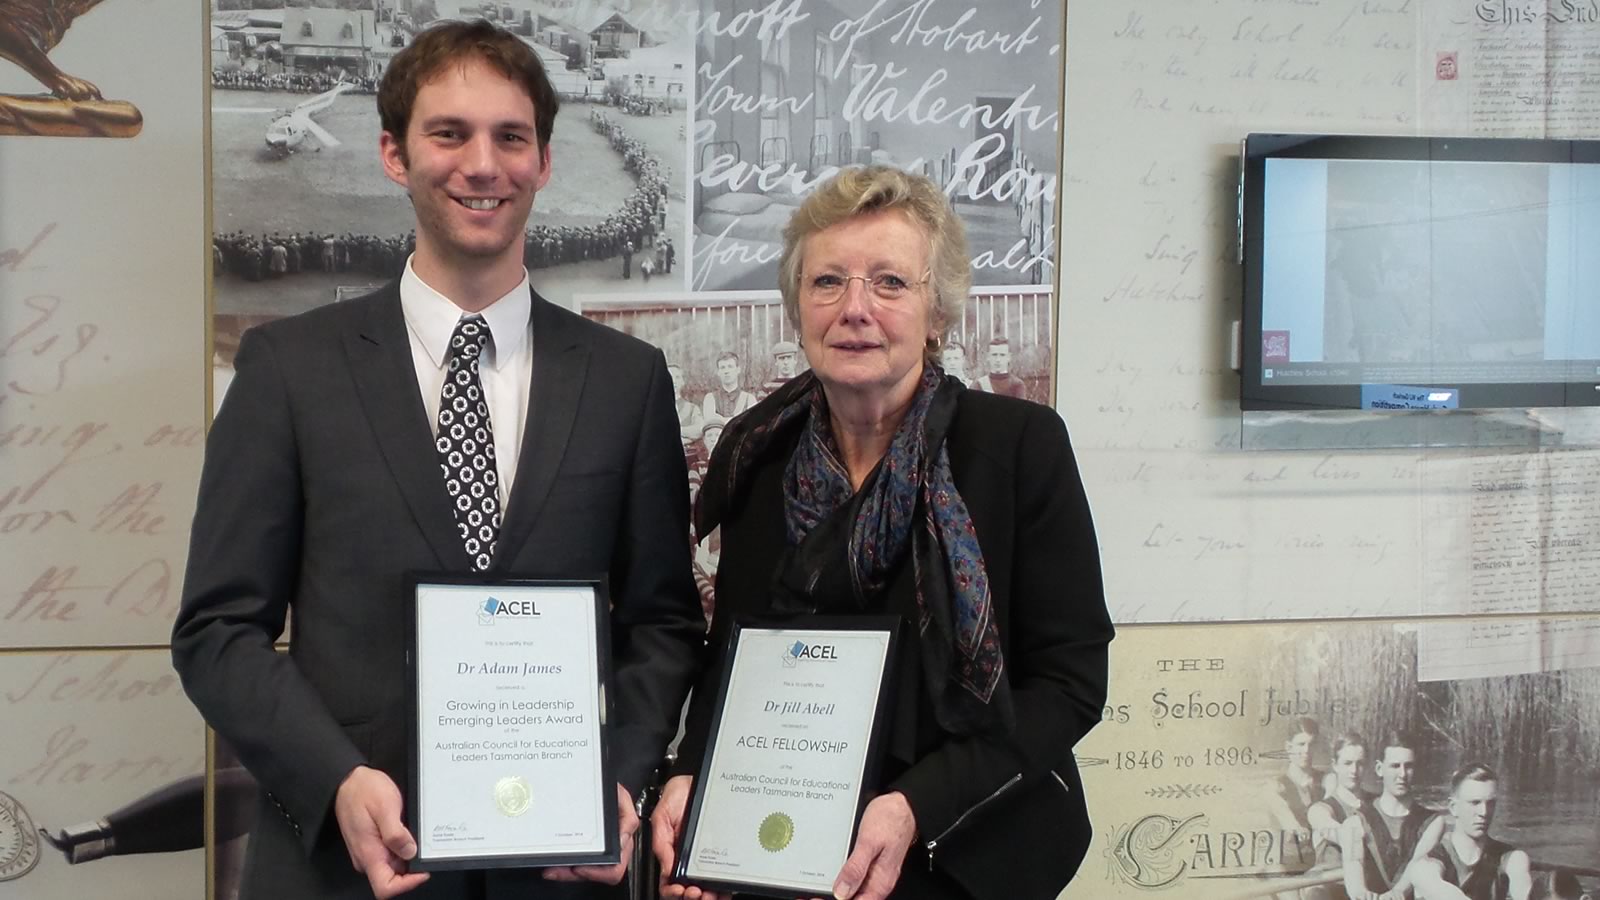 ACEL award recipients, Dr Adam James and Dr Jill Abell. (large)